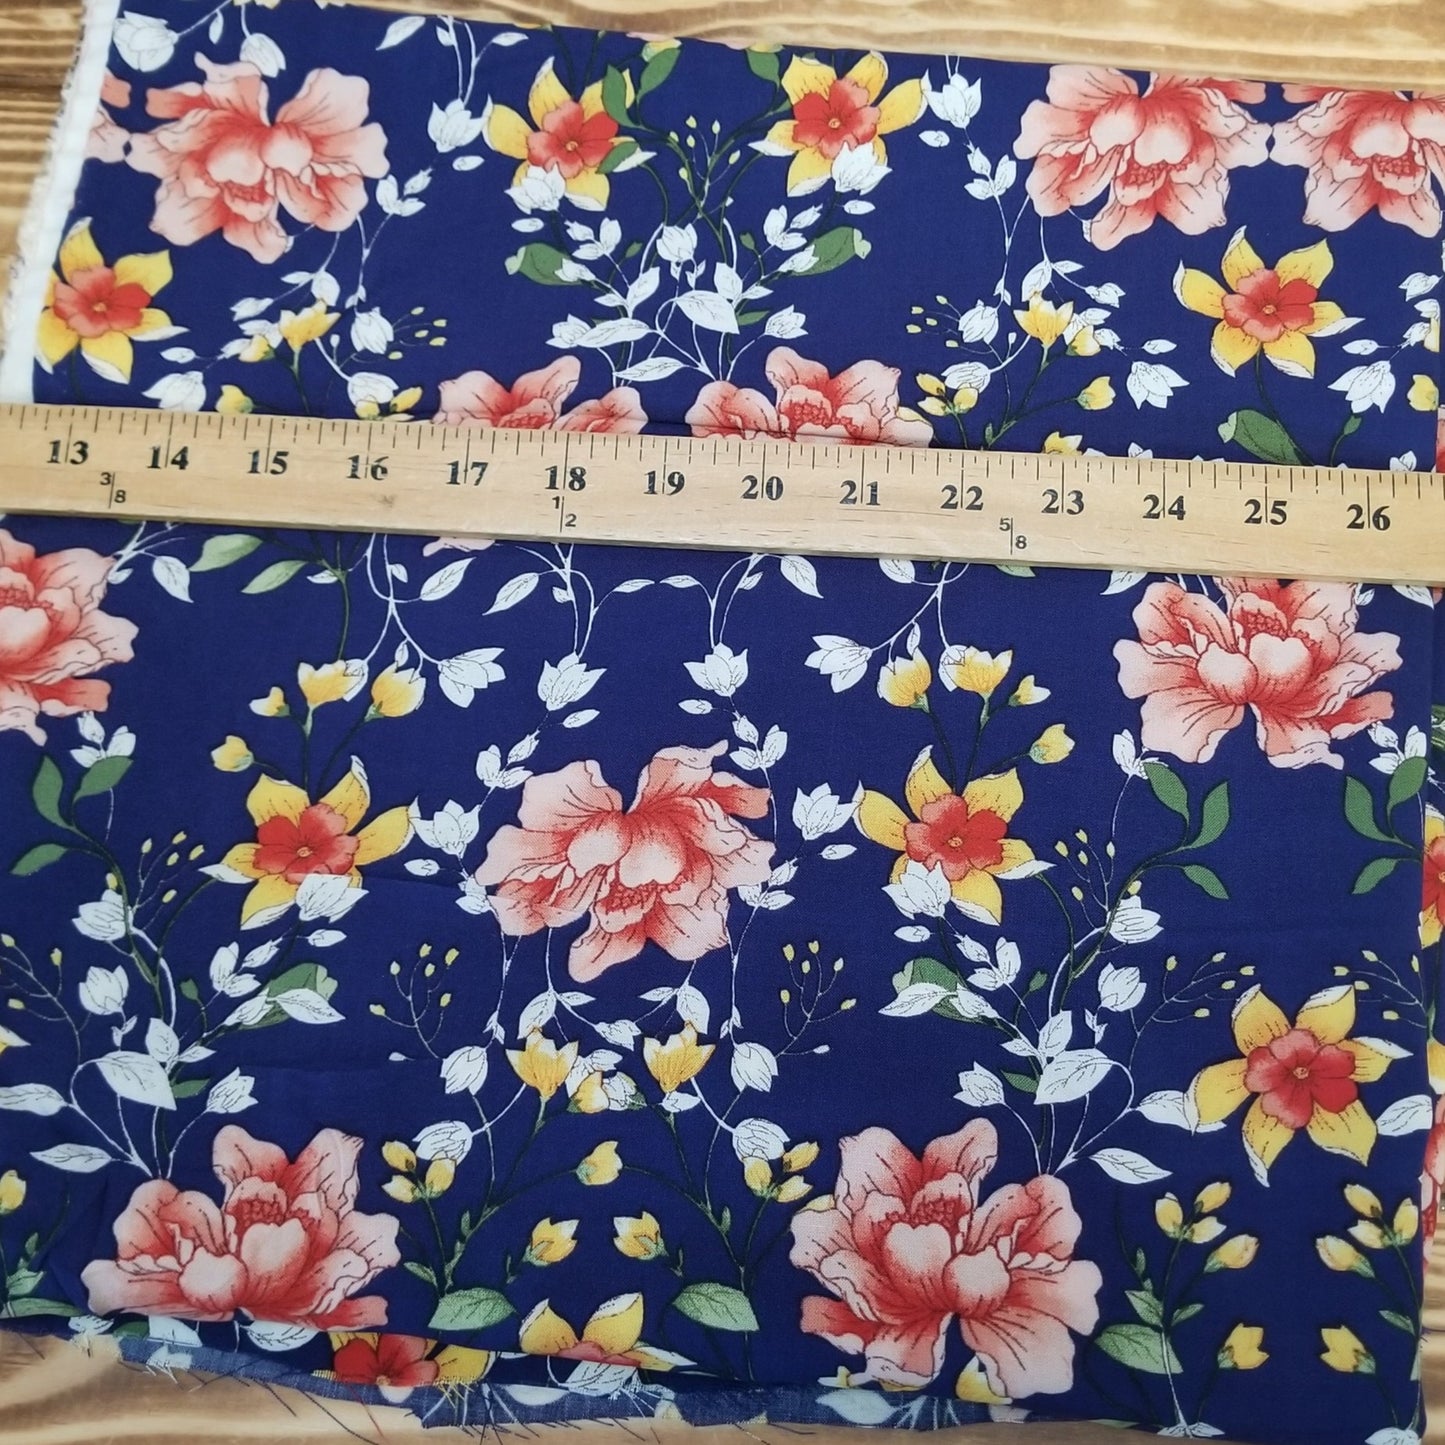 Designer Deadstock Navy and Yellow Floral Bouquet Rayon Challis Woven-price per yard